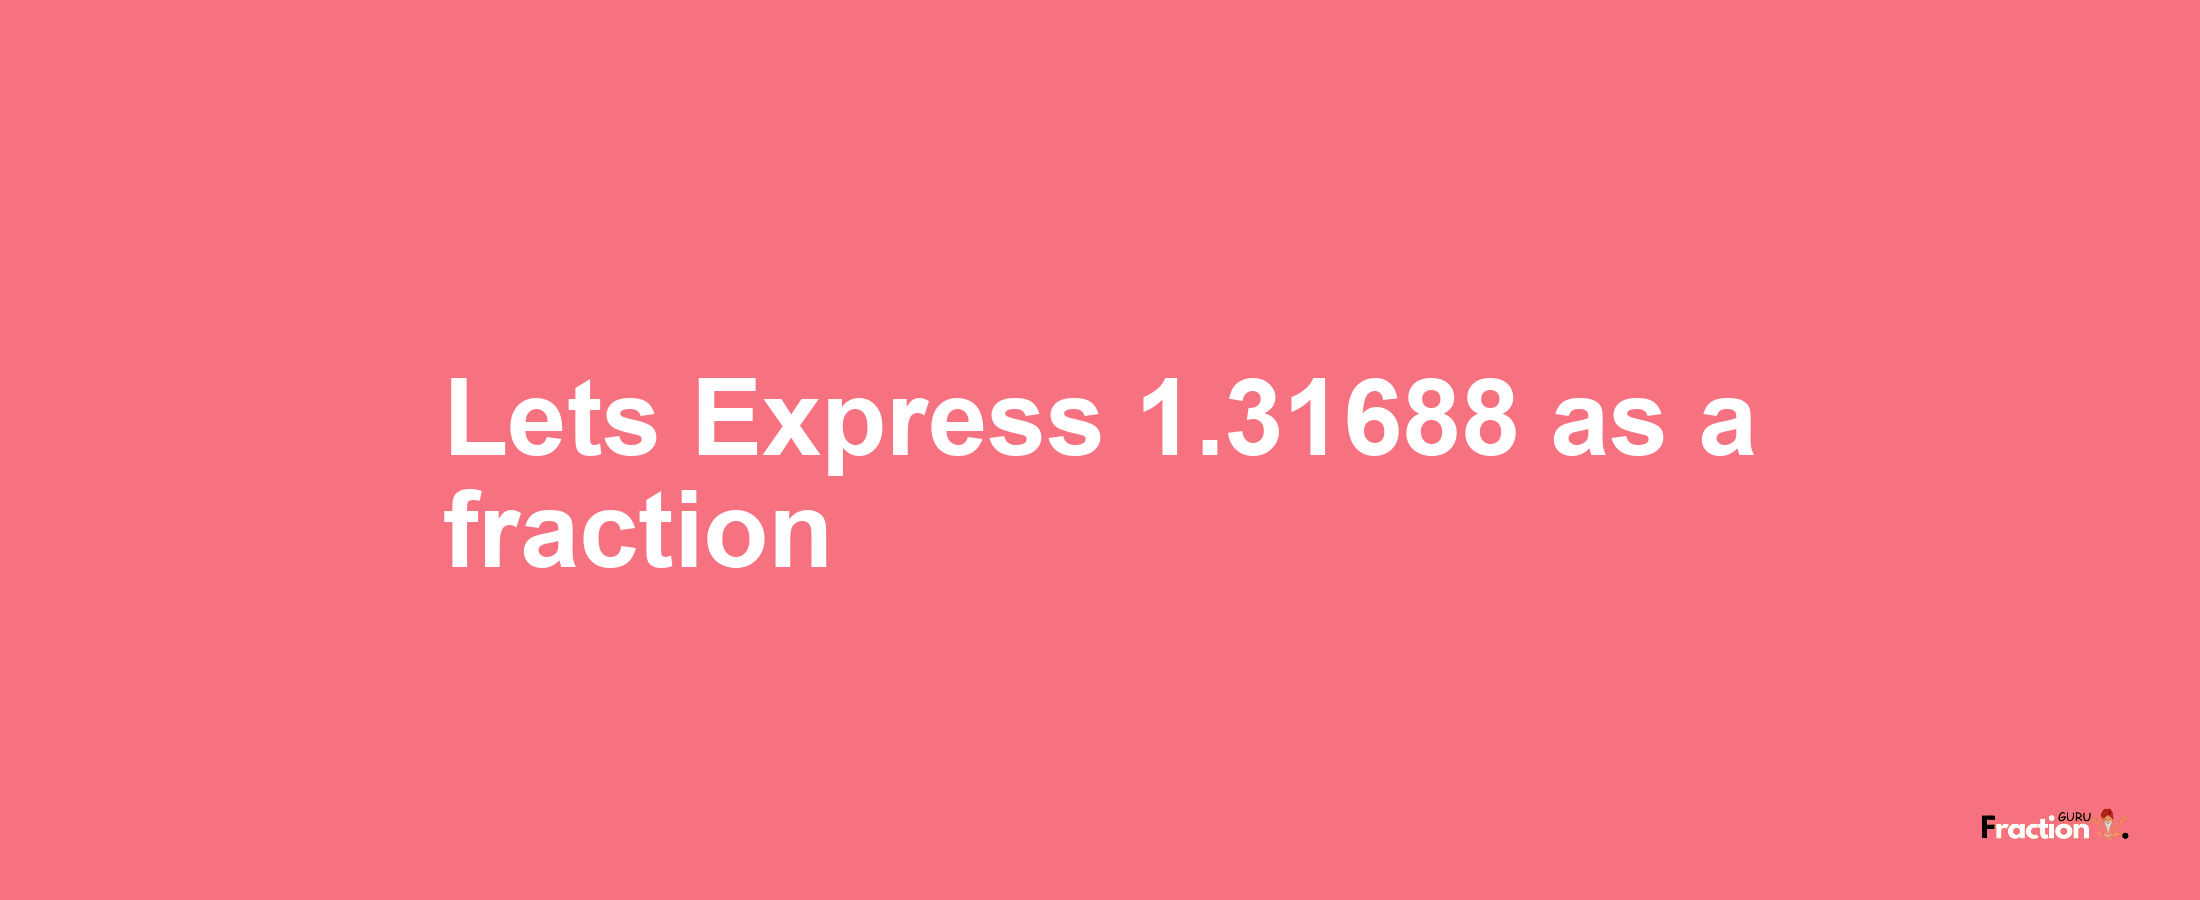 Lets Express 1.31688 as afraction